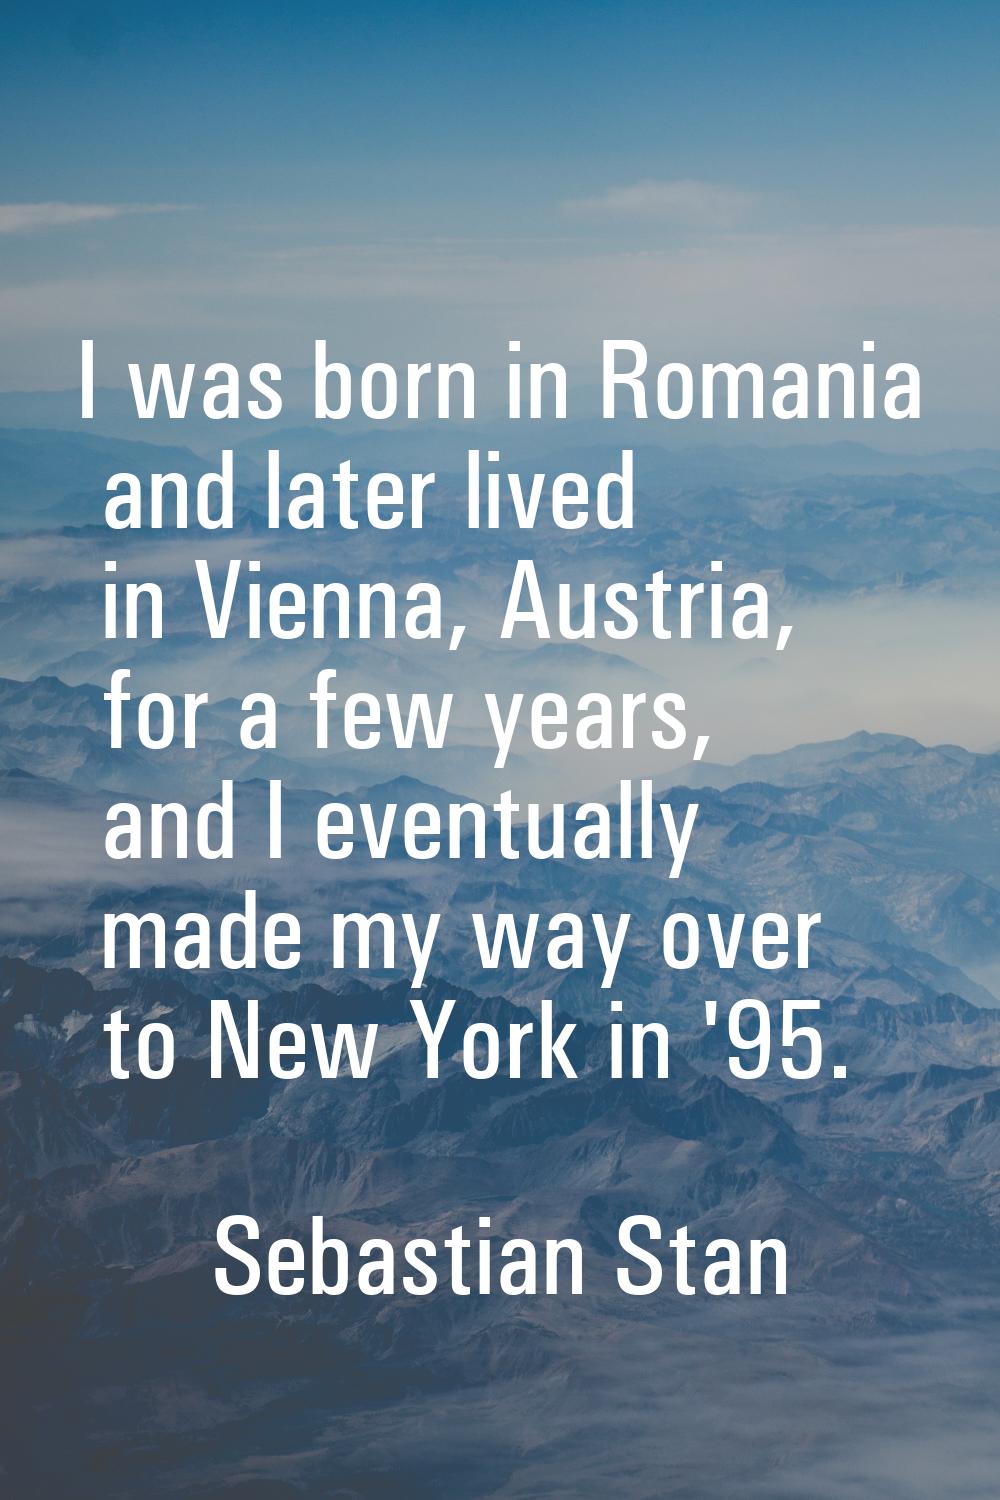 I was born in Romania and later lived in Vienna, Austria, for a few years, and I eventually made my